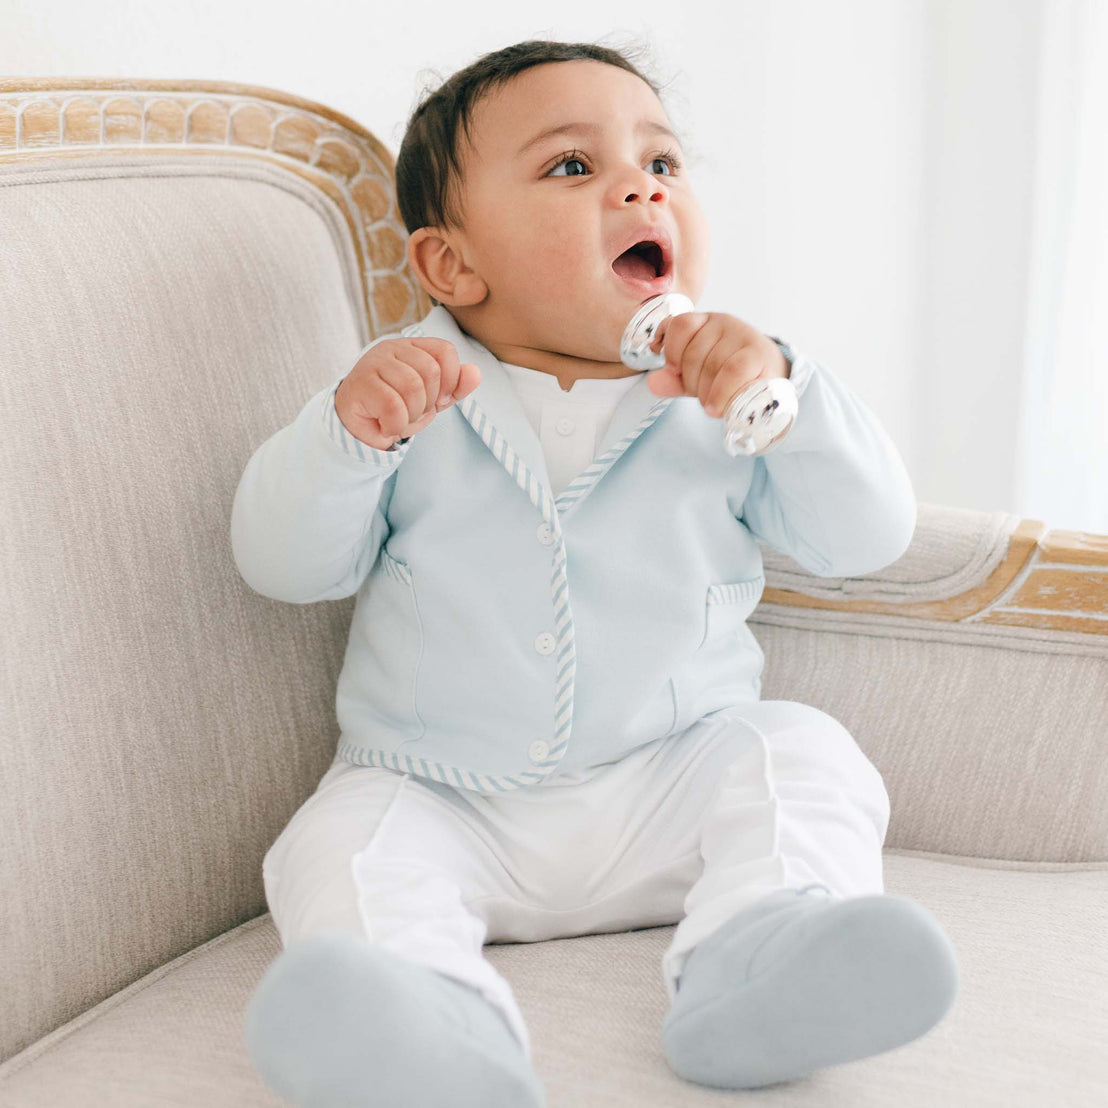 Baby boy sitting on a couch and wearing the Theodore 3-Piece Suit in blue.